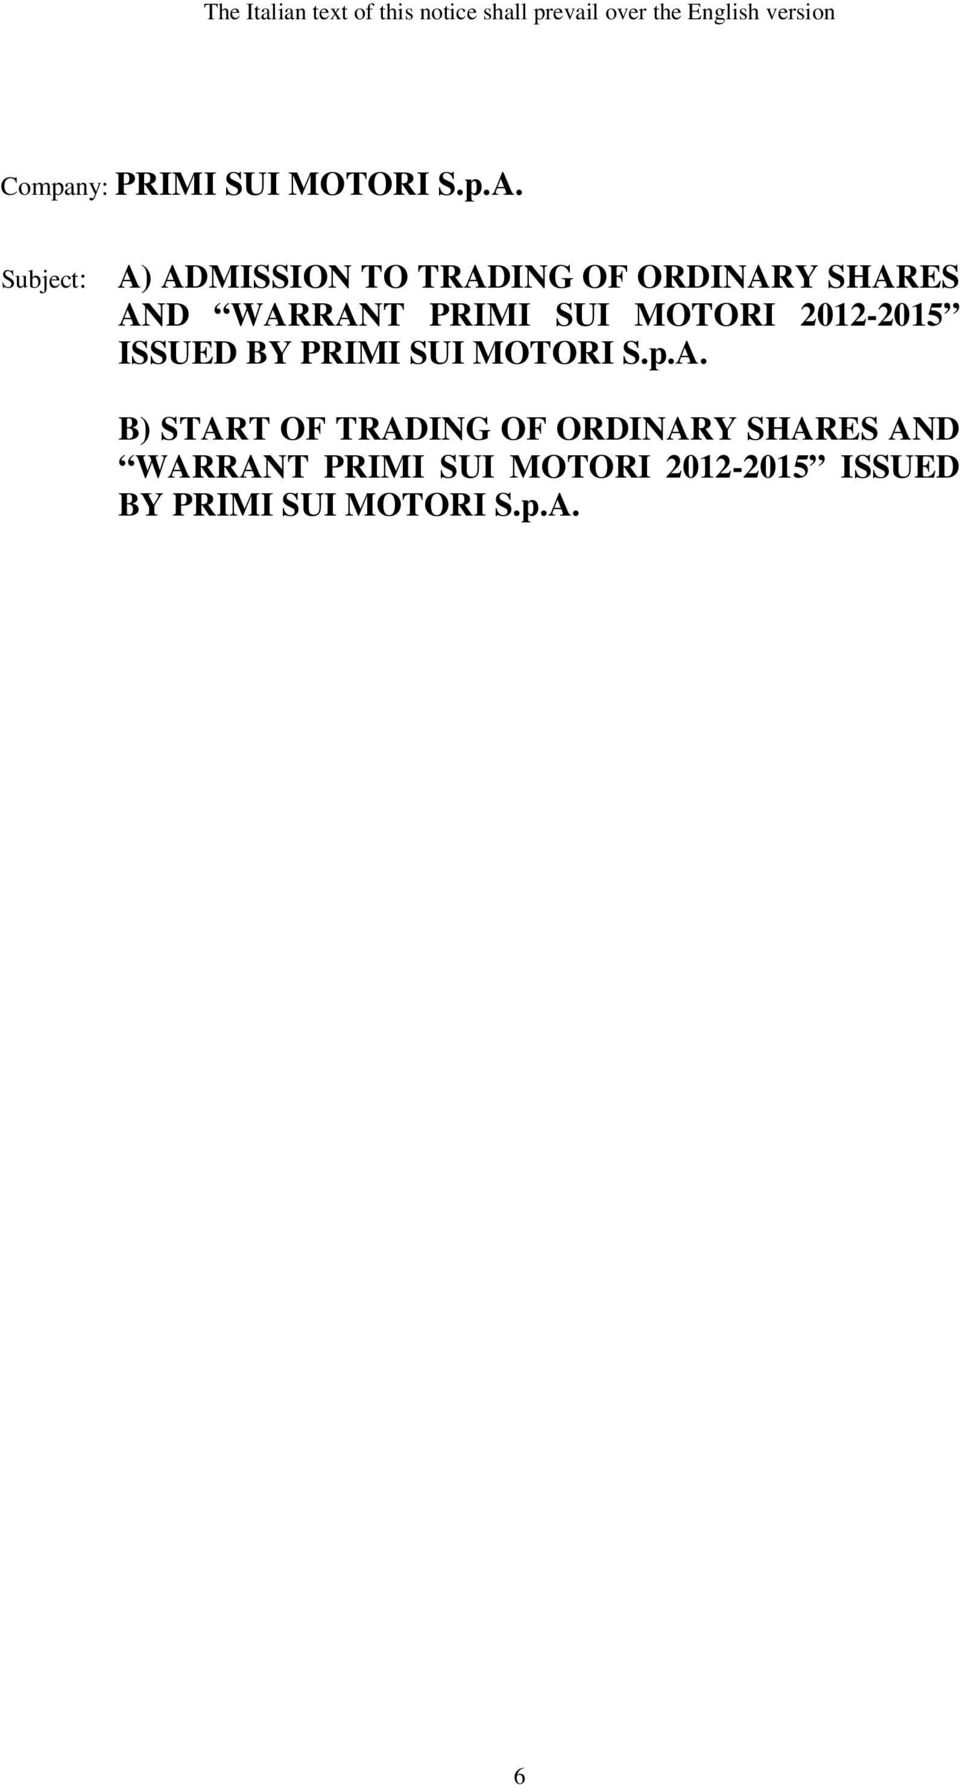 Subject: A) ADMISSION TO TRADING OF ORDINARY SHARES AND WARRANT PRIMI SUI MOTORI